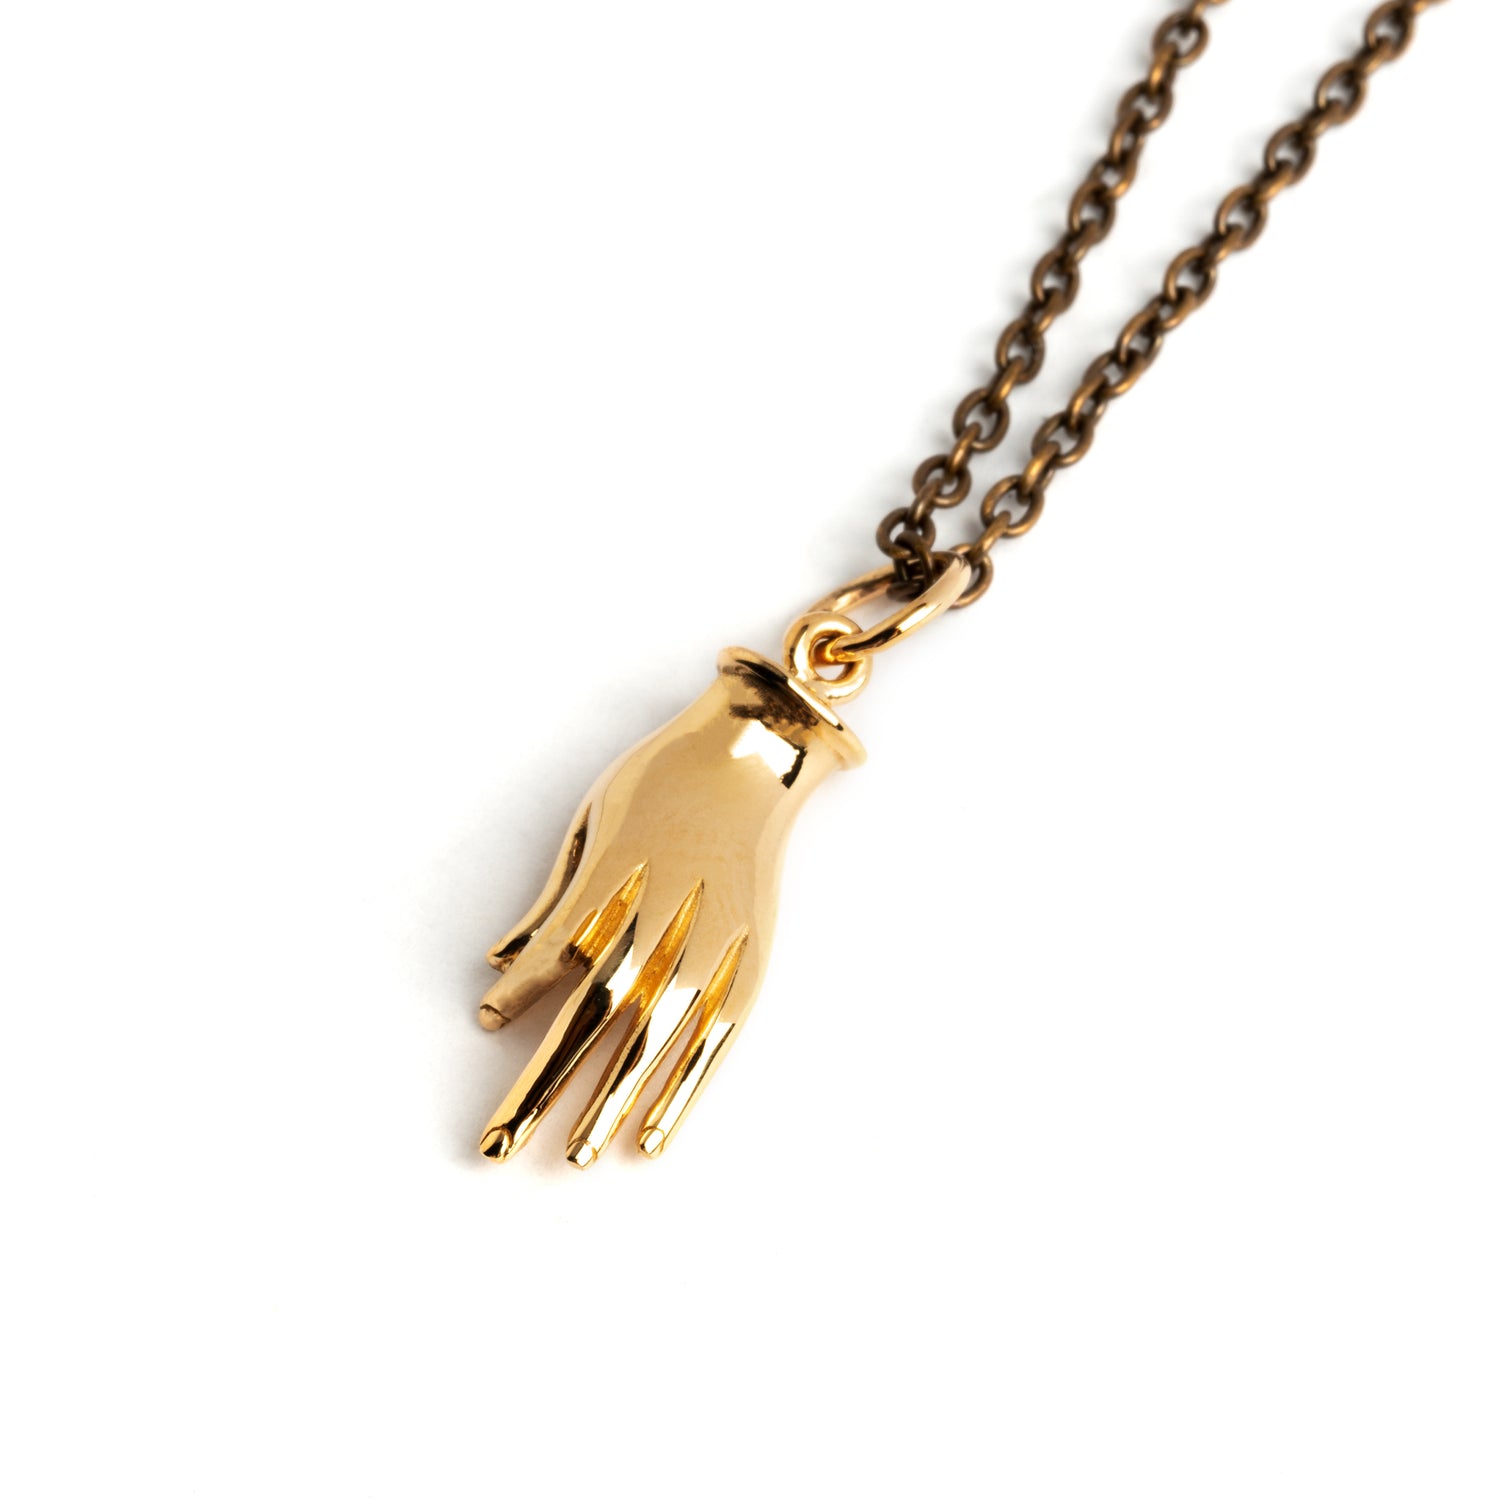 Bronze Mudra Charm necklace right side view